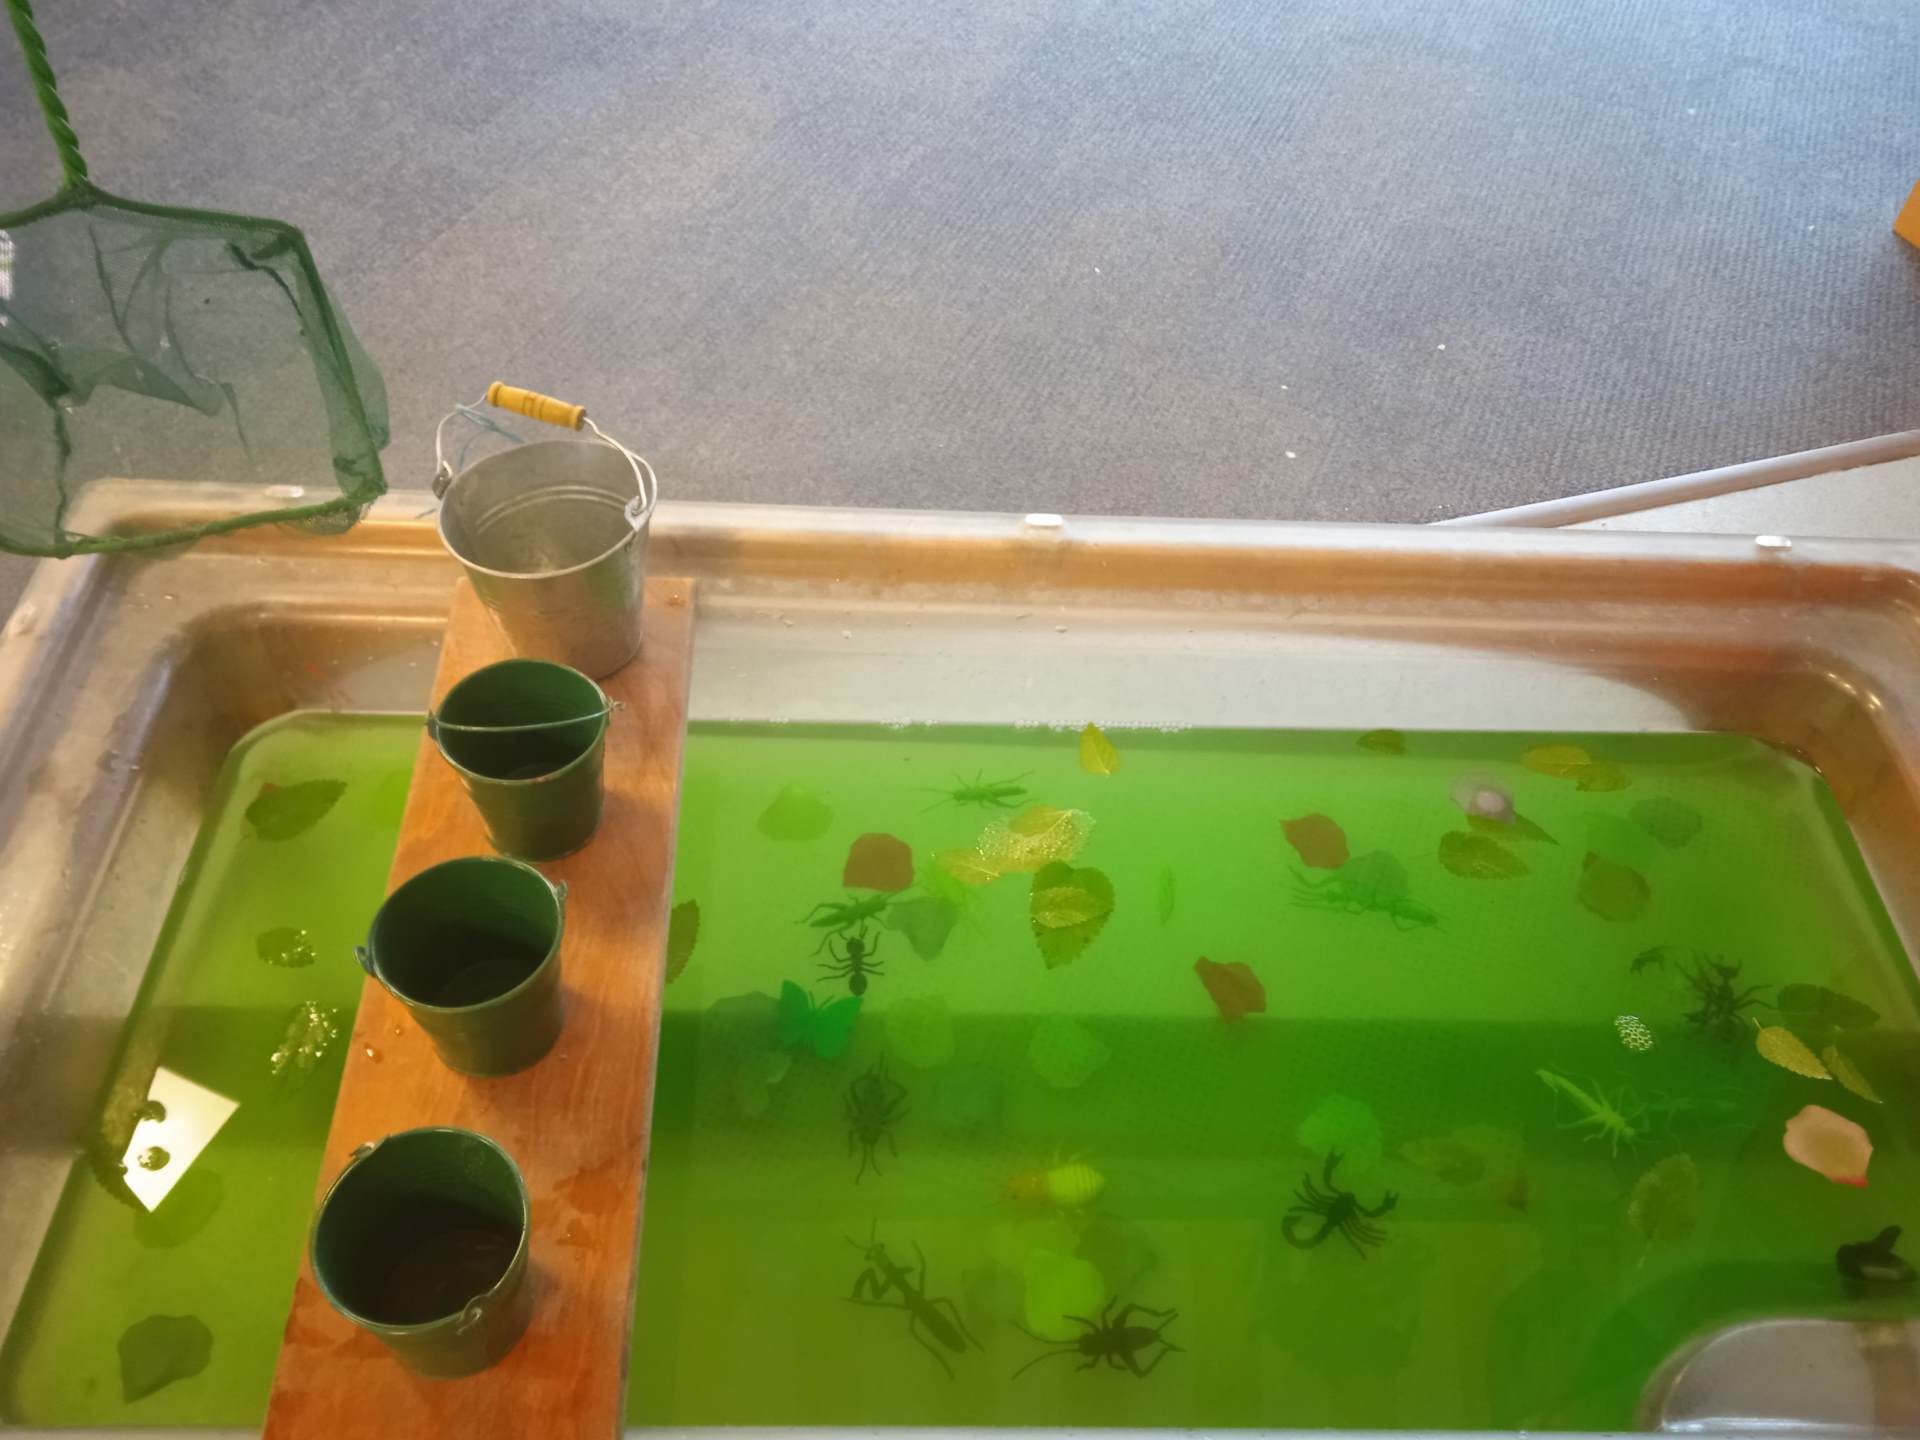 Green water with bugs and leaves